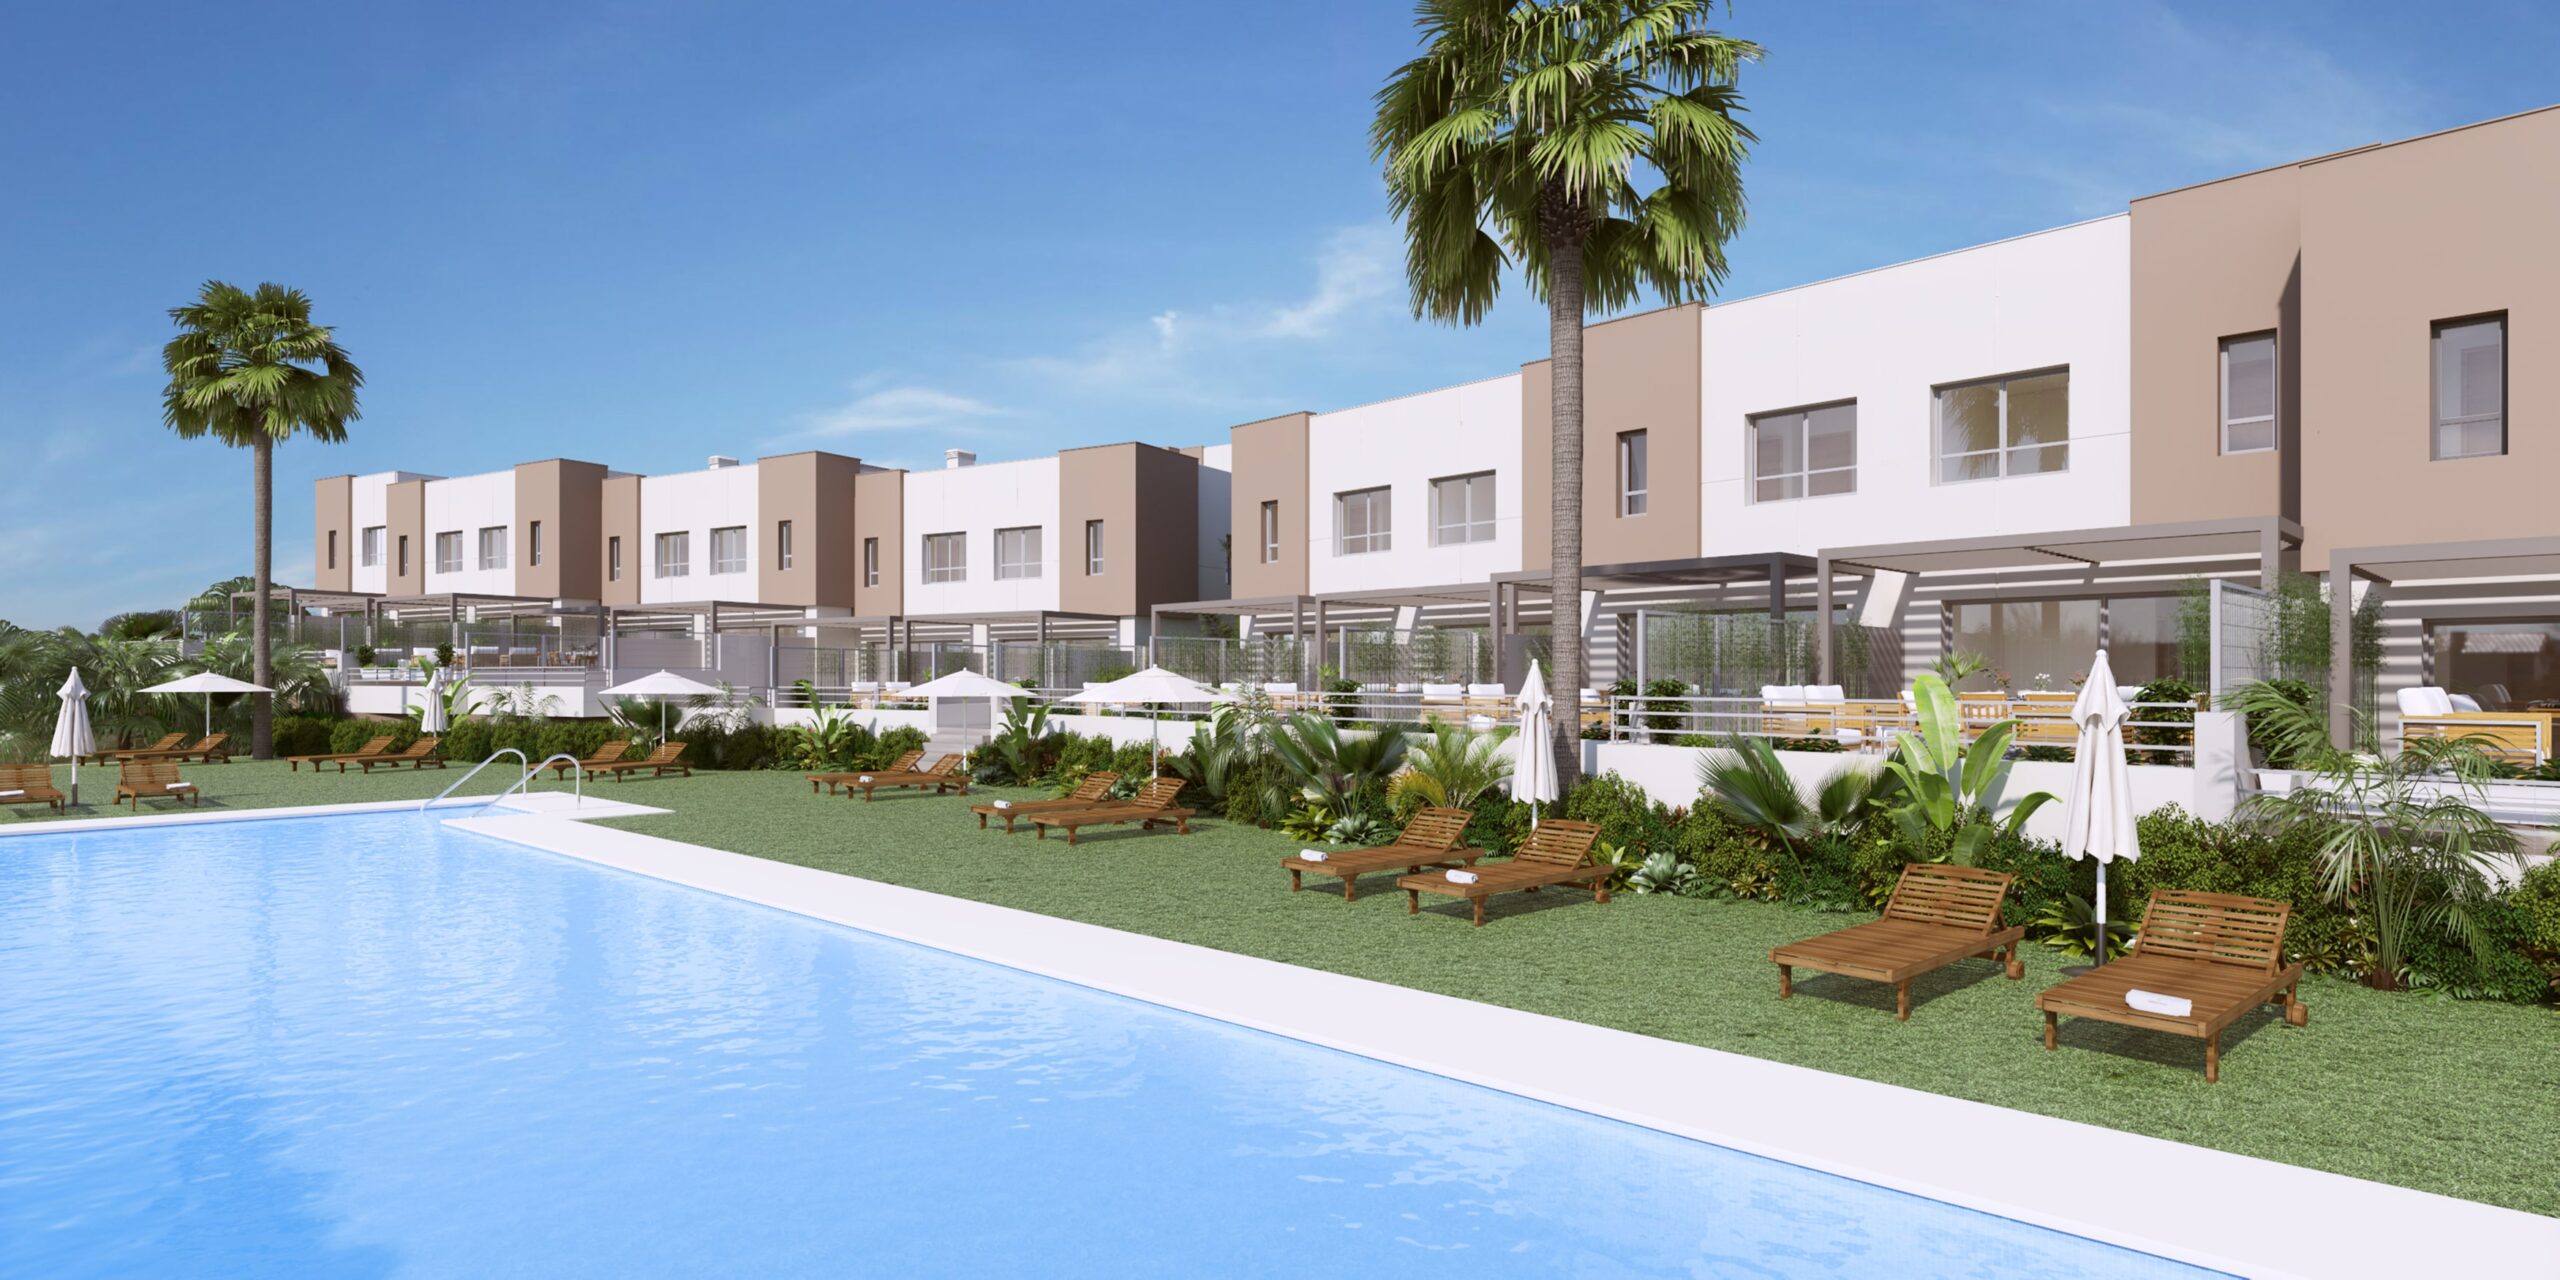 Green Golf Townhouse - Estepona real state